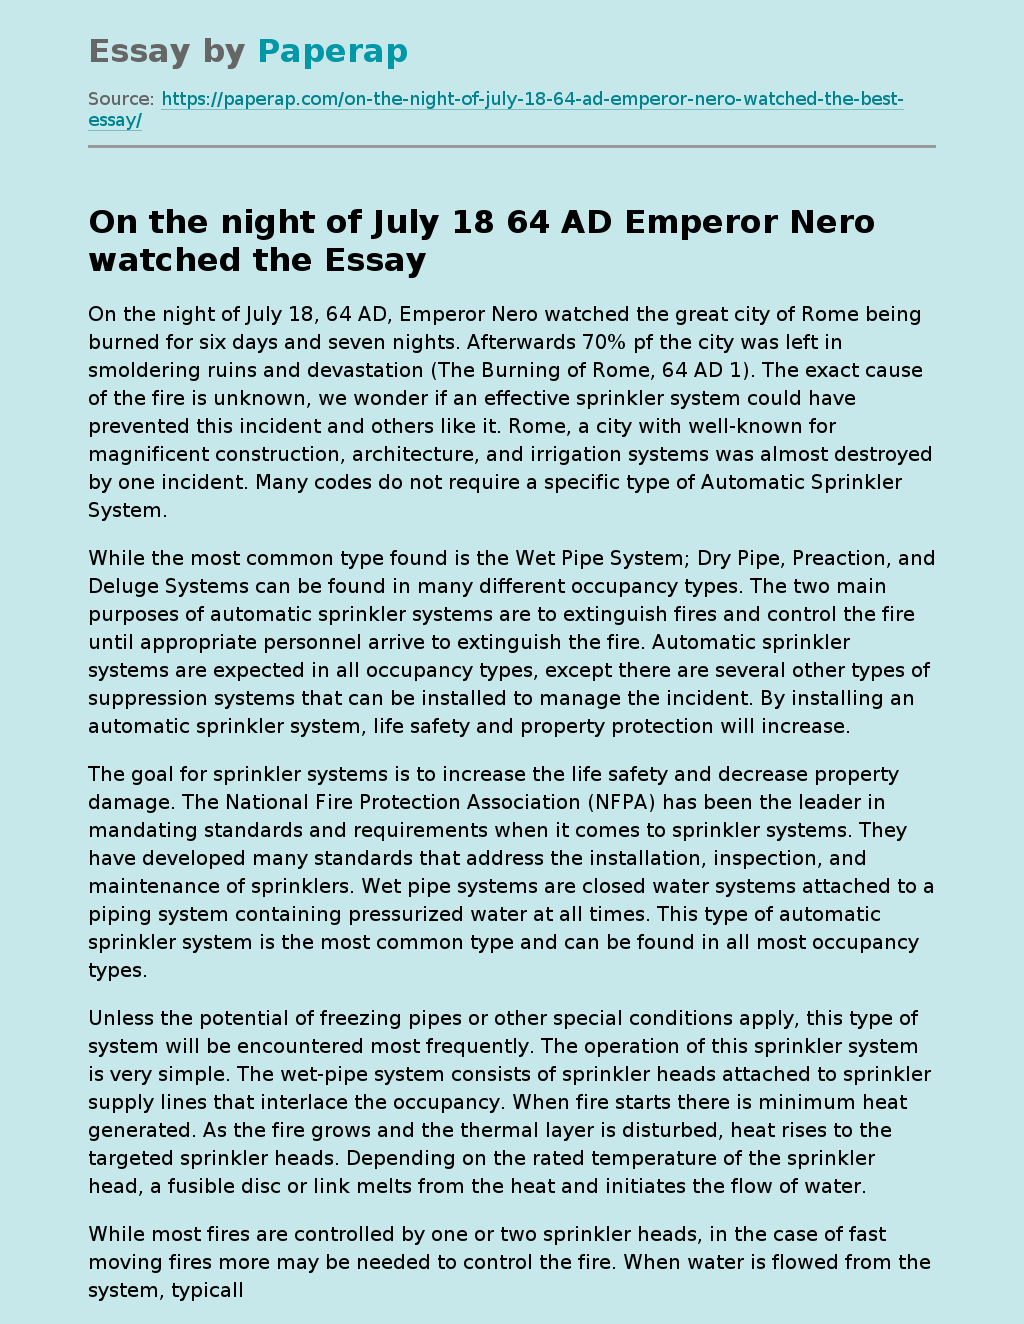 On the night of July 18 64 AD Emperor Nero watched the